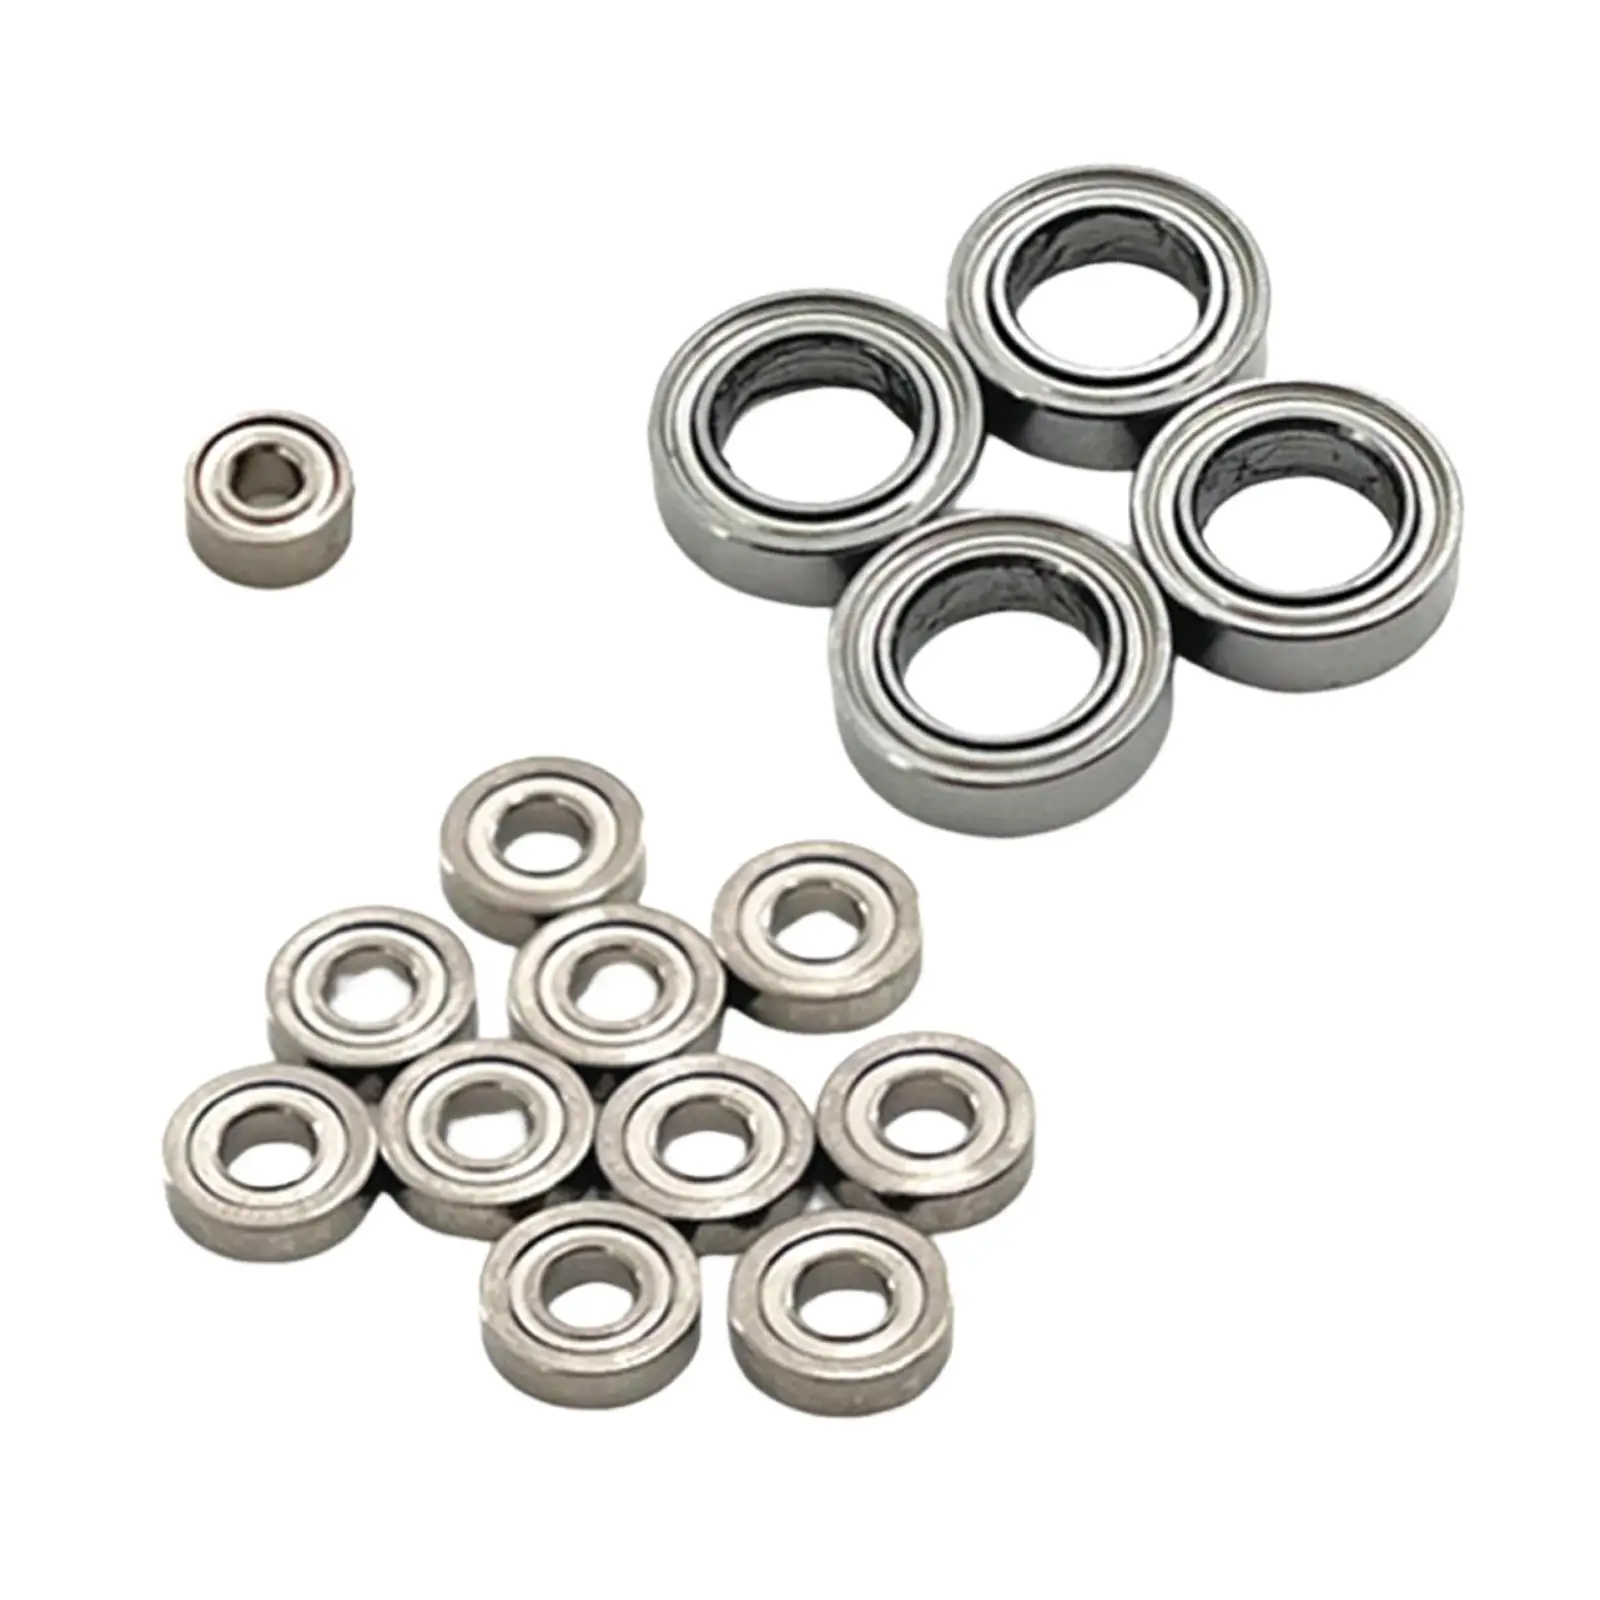 15 Pieces Metal Upgraded Ball Bearings for Wltoys 1/28 Scale RC Car Crawler